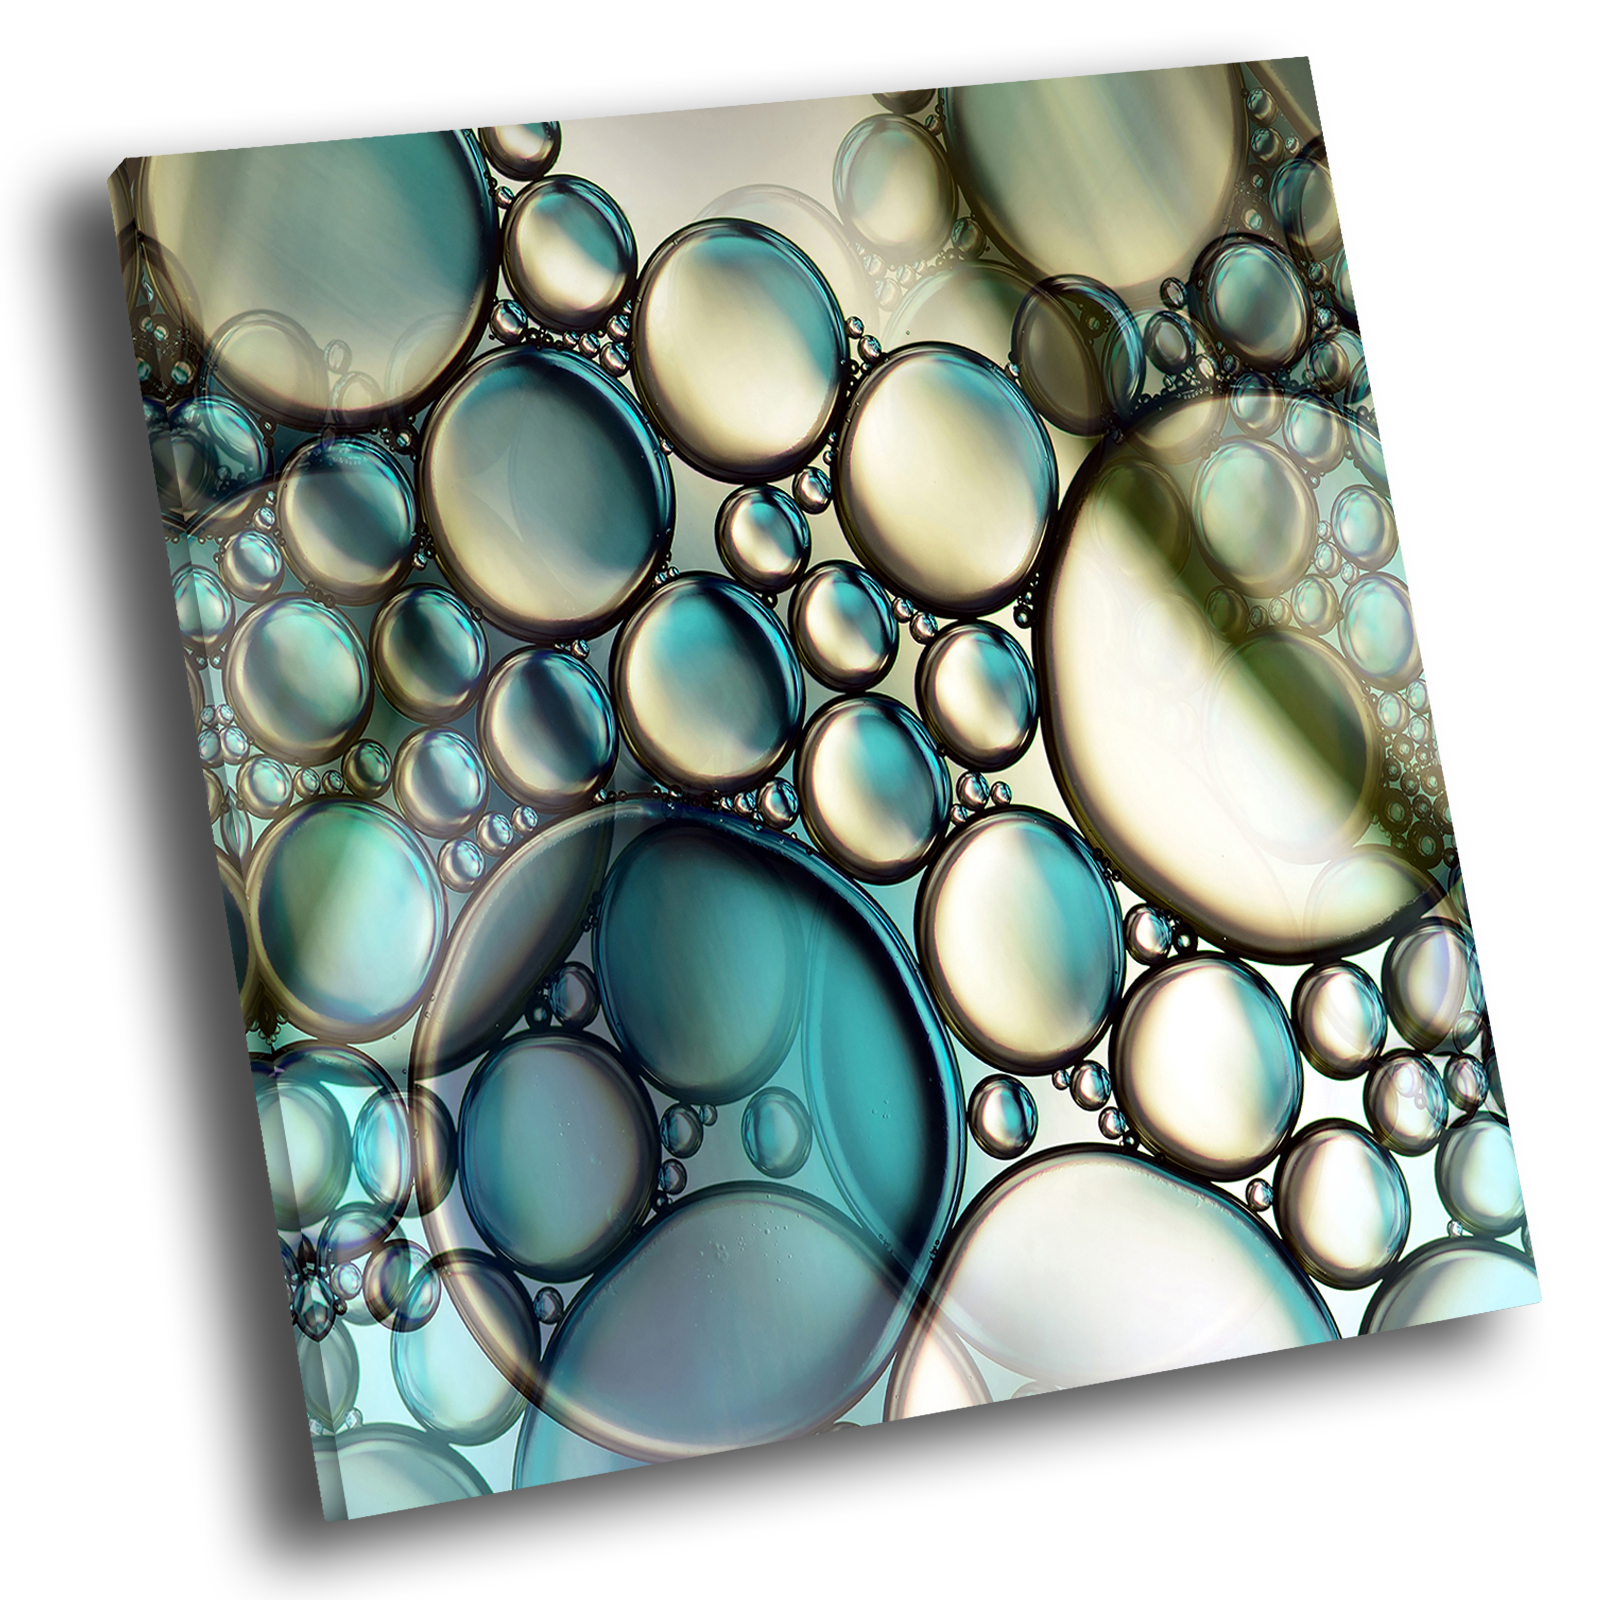 AB937 Blue Teal White Cool Modern Abstract Canvas Wall Art Large Picture Prints 